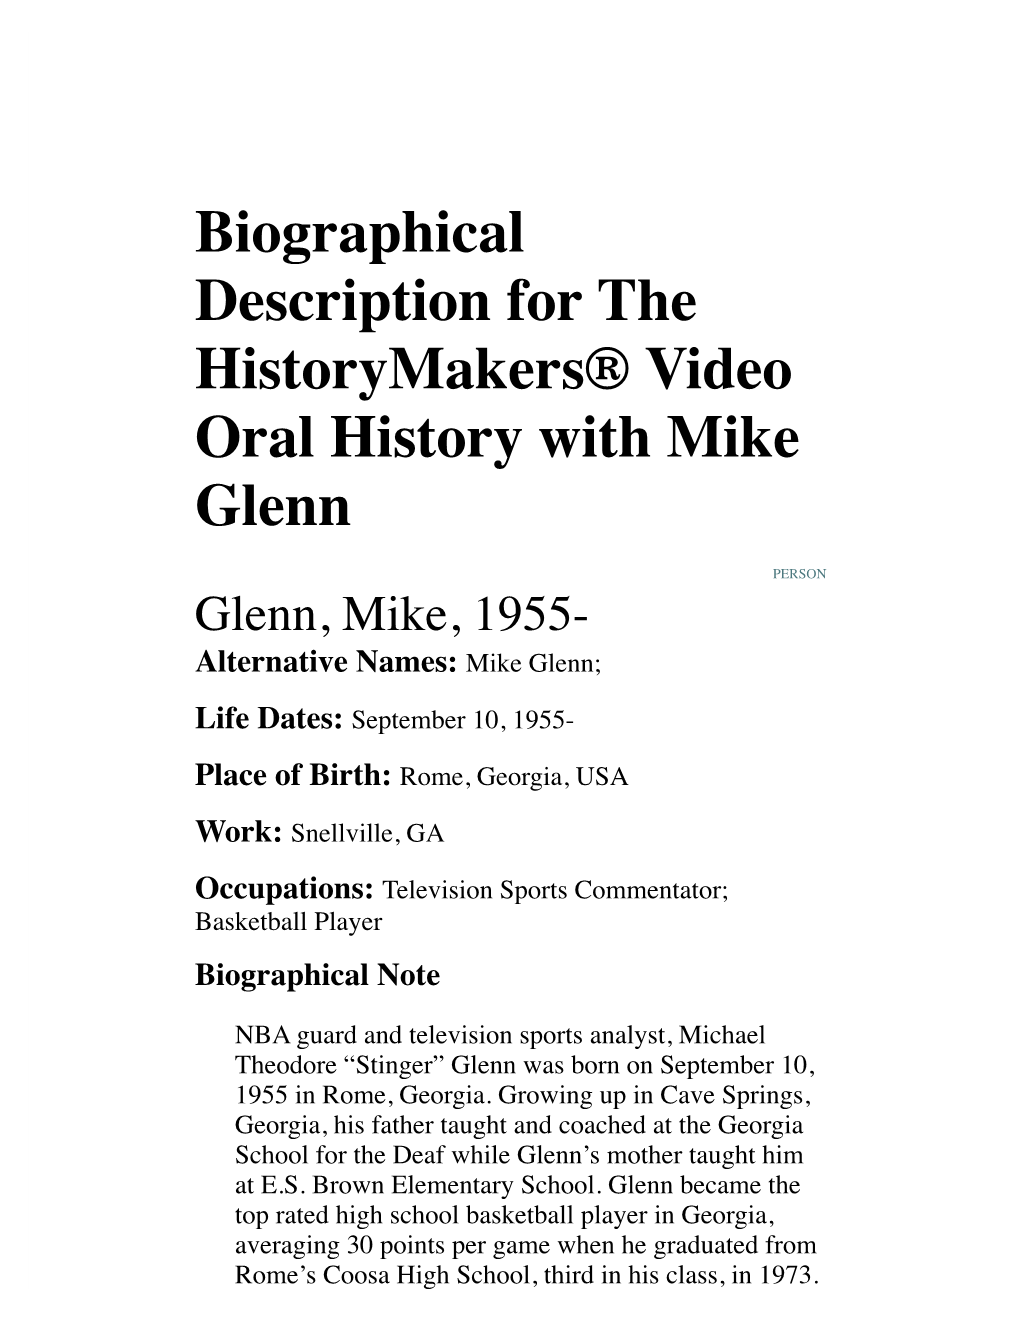 Biographical Description for the Historymakers® Video Oral History with Mike Glenn